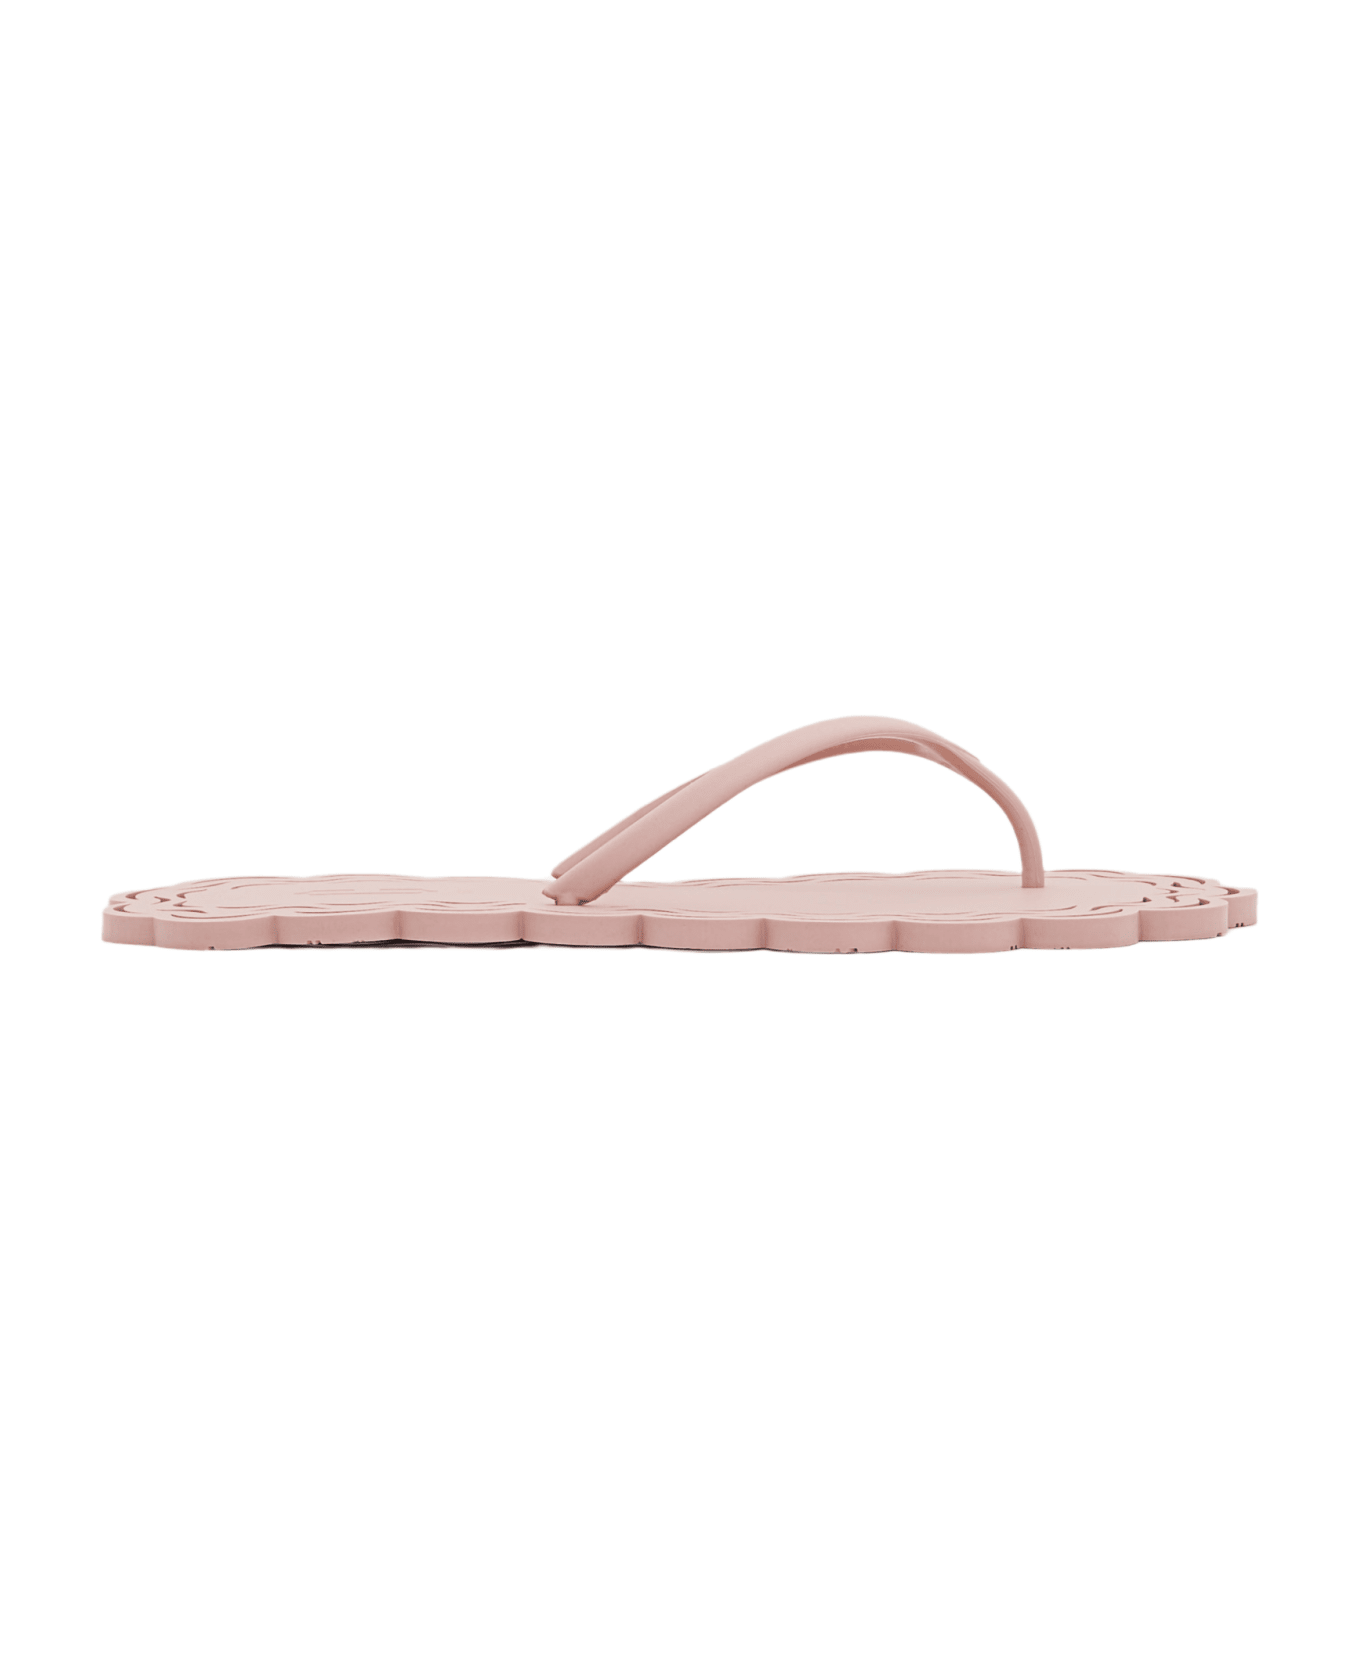 Carlotha Ray Laser-cut Recycled Rubber Flip Flops - Pink